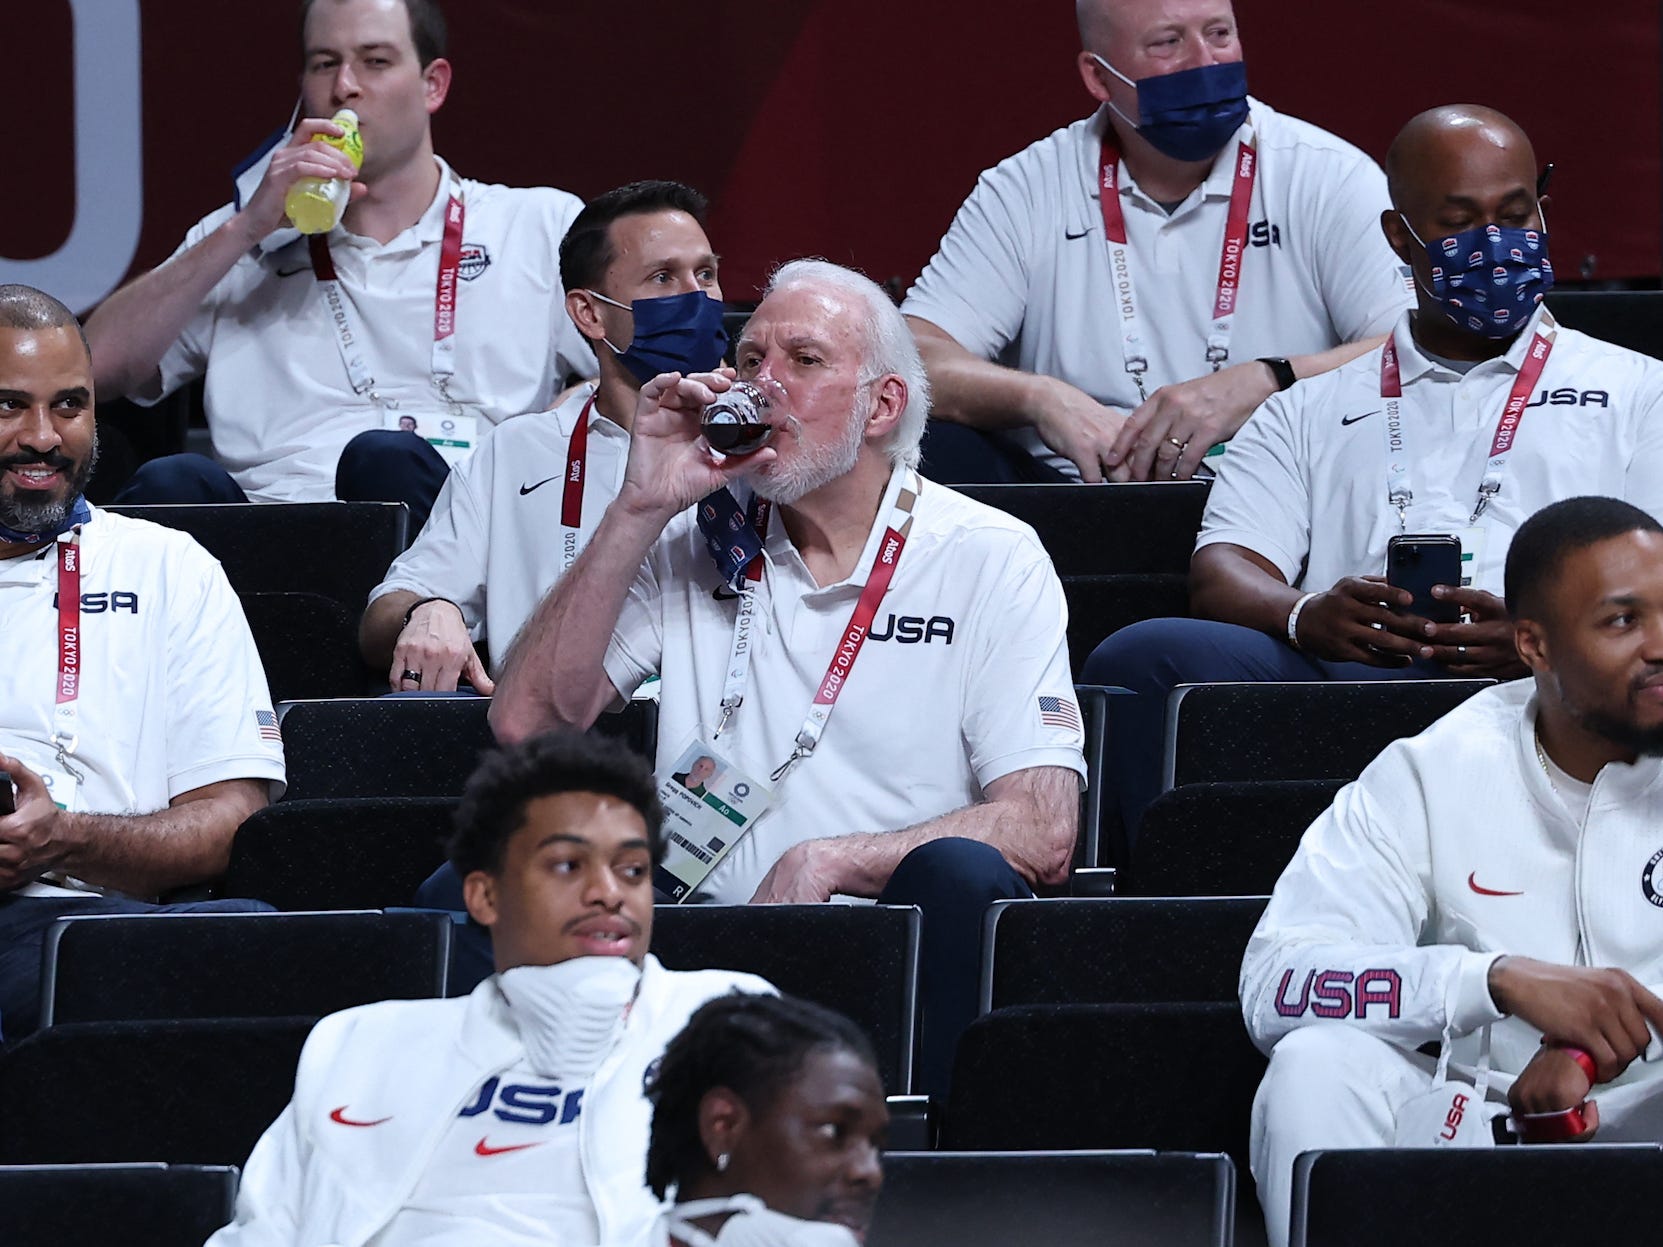 Gregg  Popovich drinks wine in the stands during the Olympics men's basketball bronze medal match.